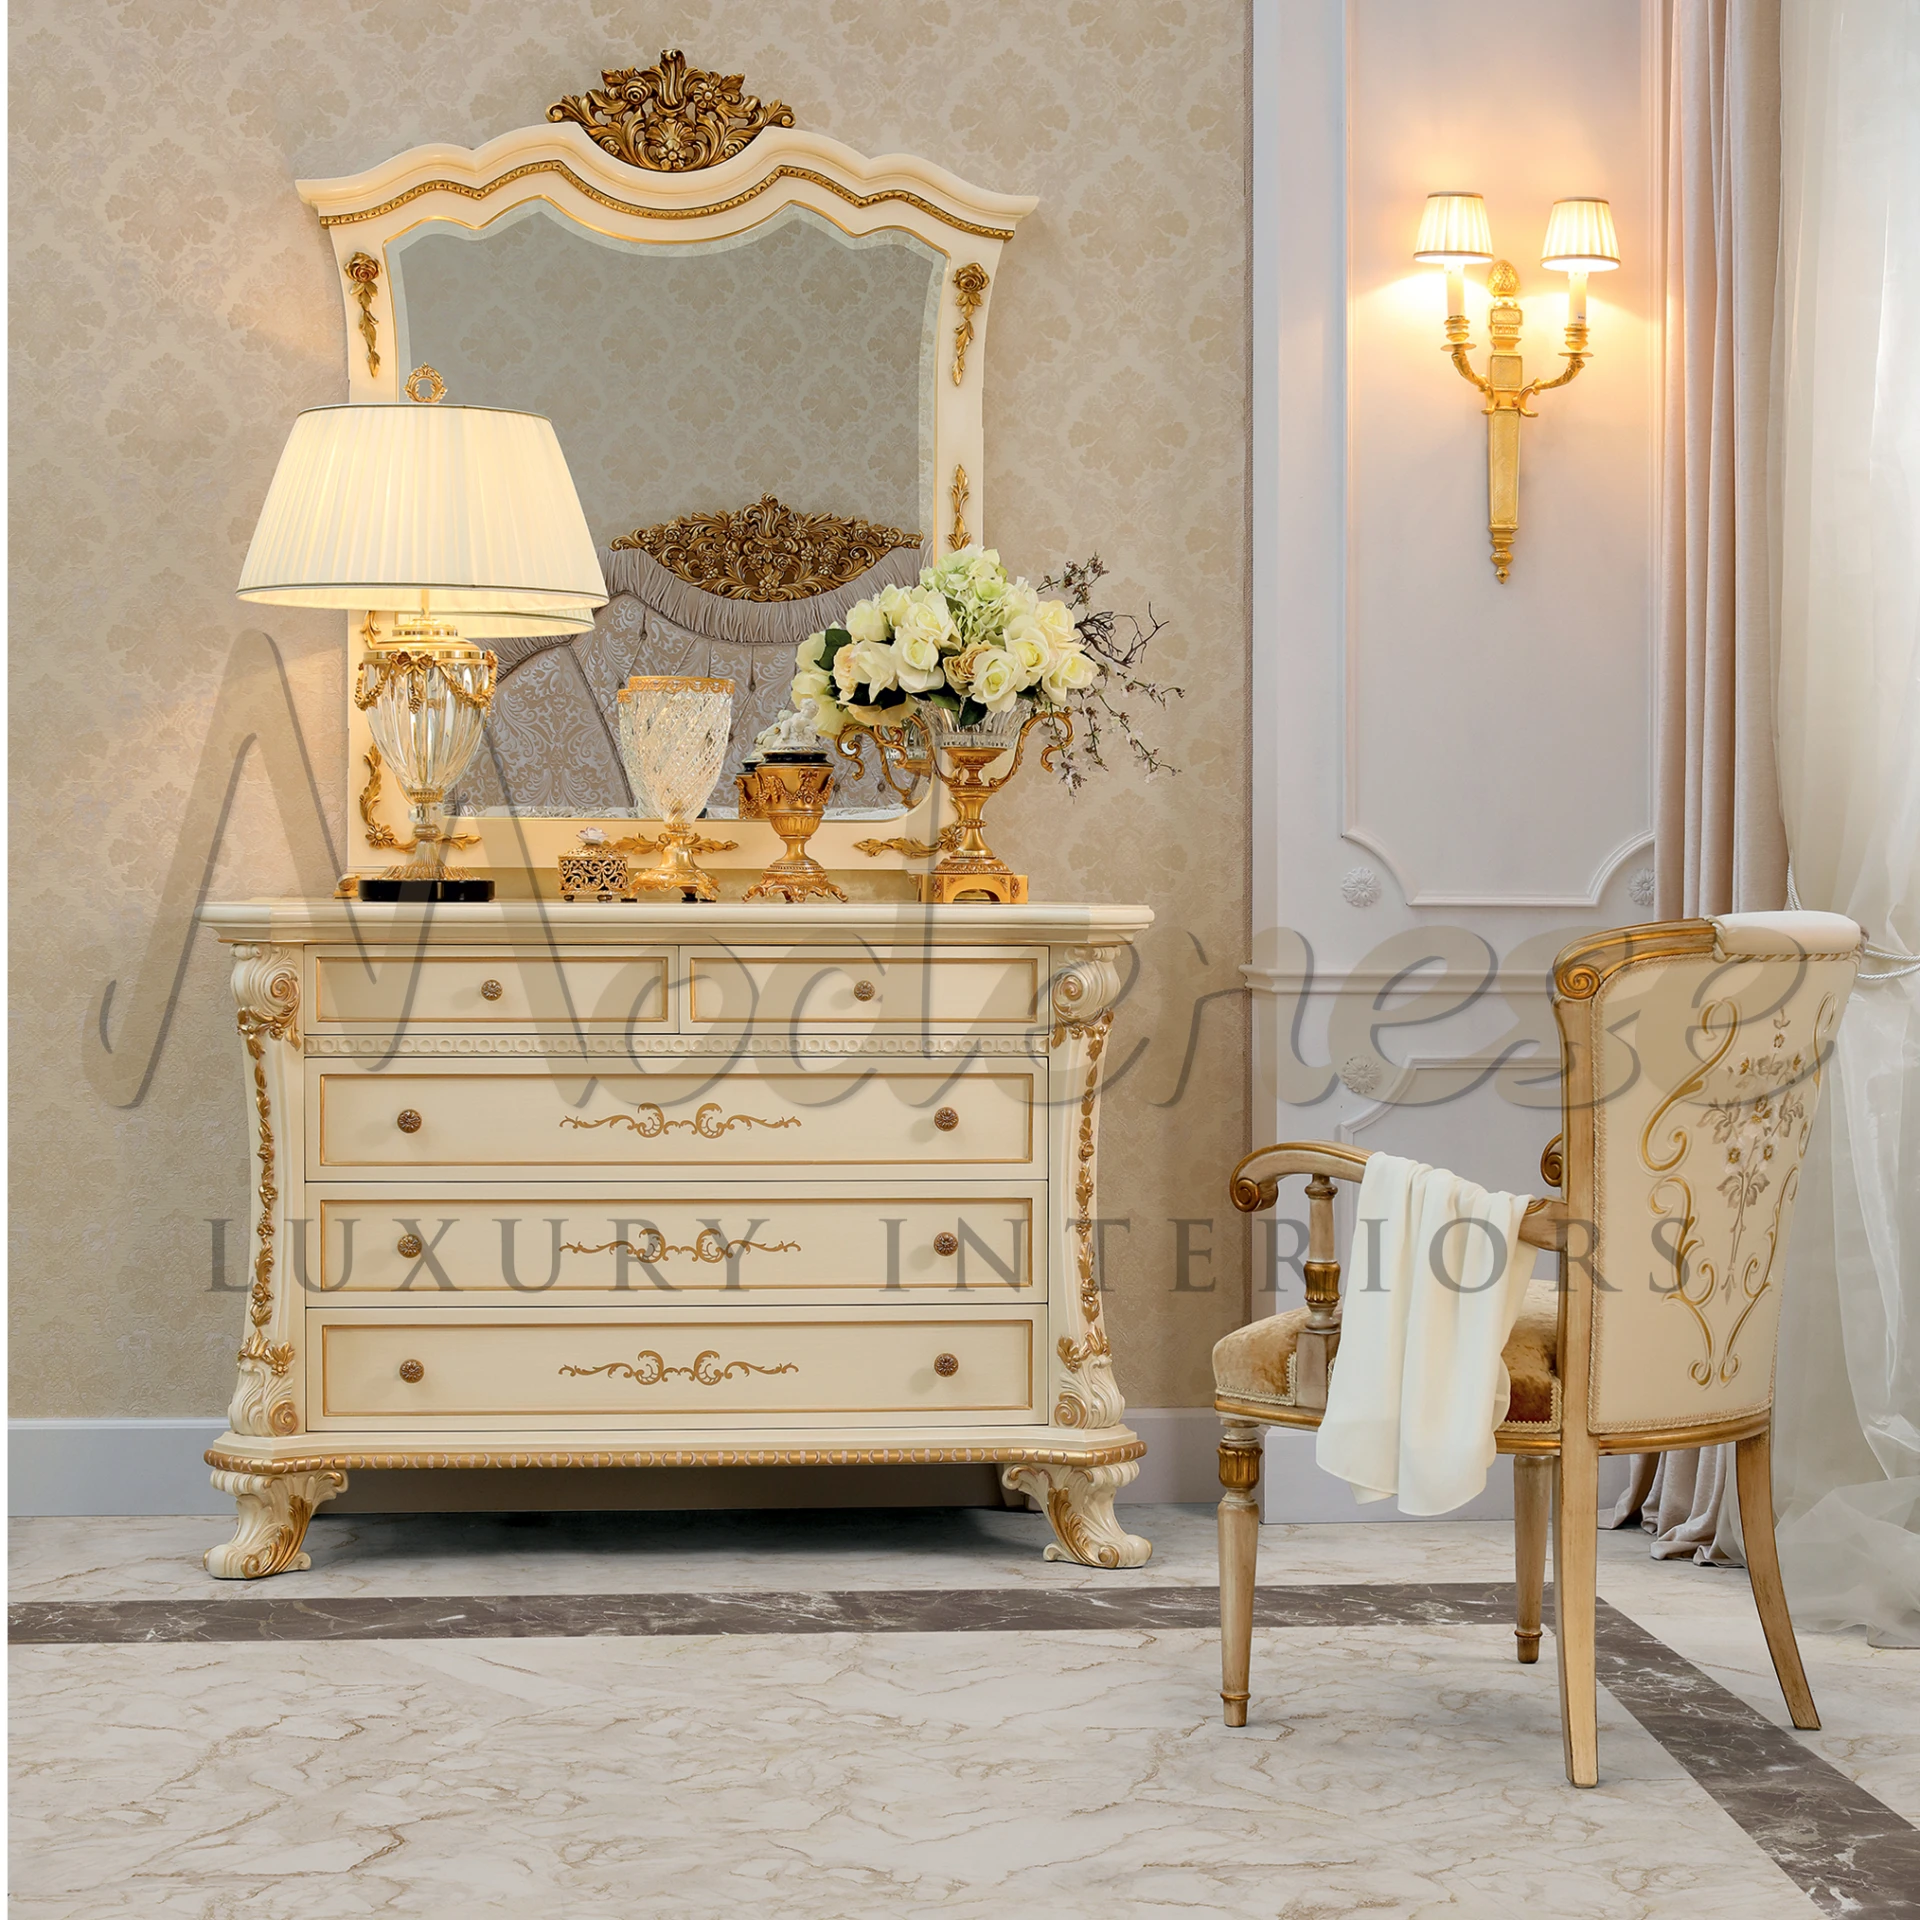 A classic cream and gold dresser with fancy decor, a matching mirror, and wall mount lighting.